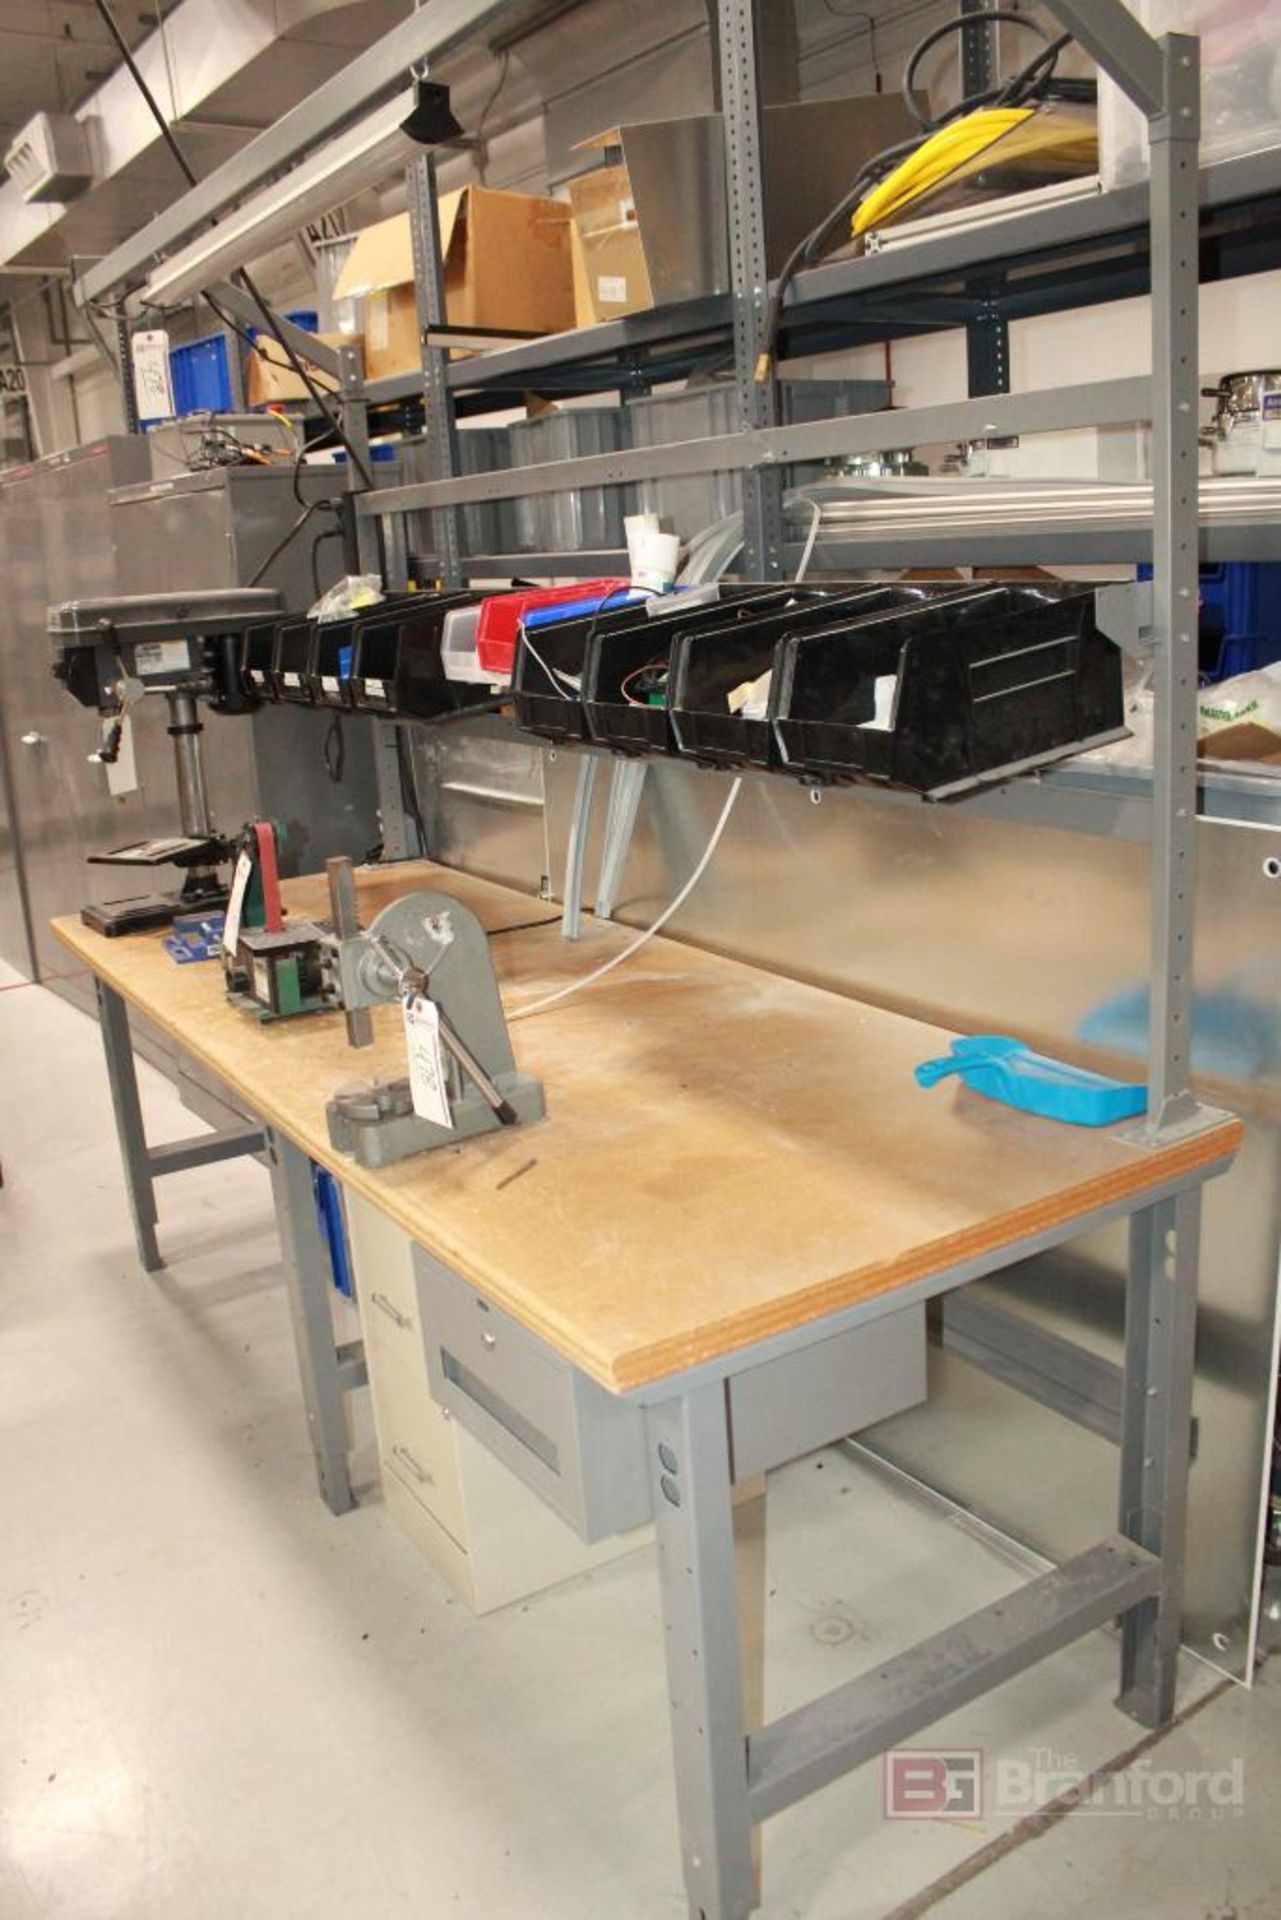 Shop Table with Machinery - Image 6 of 6